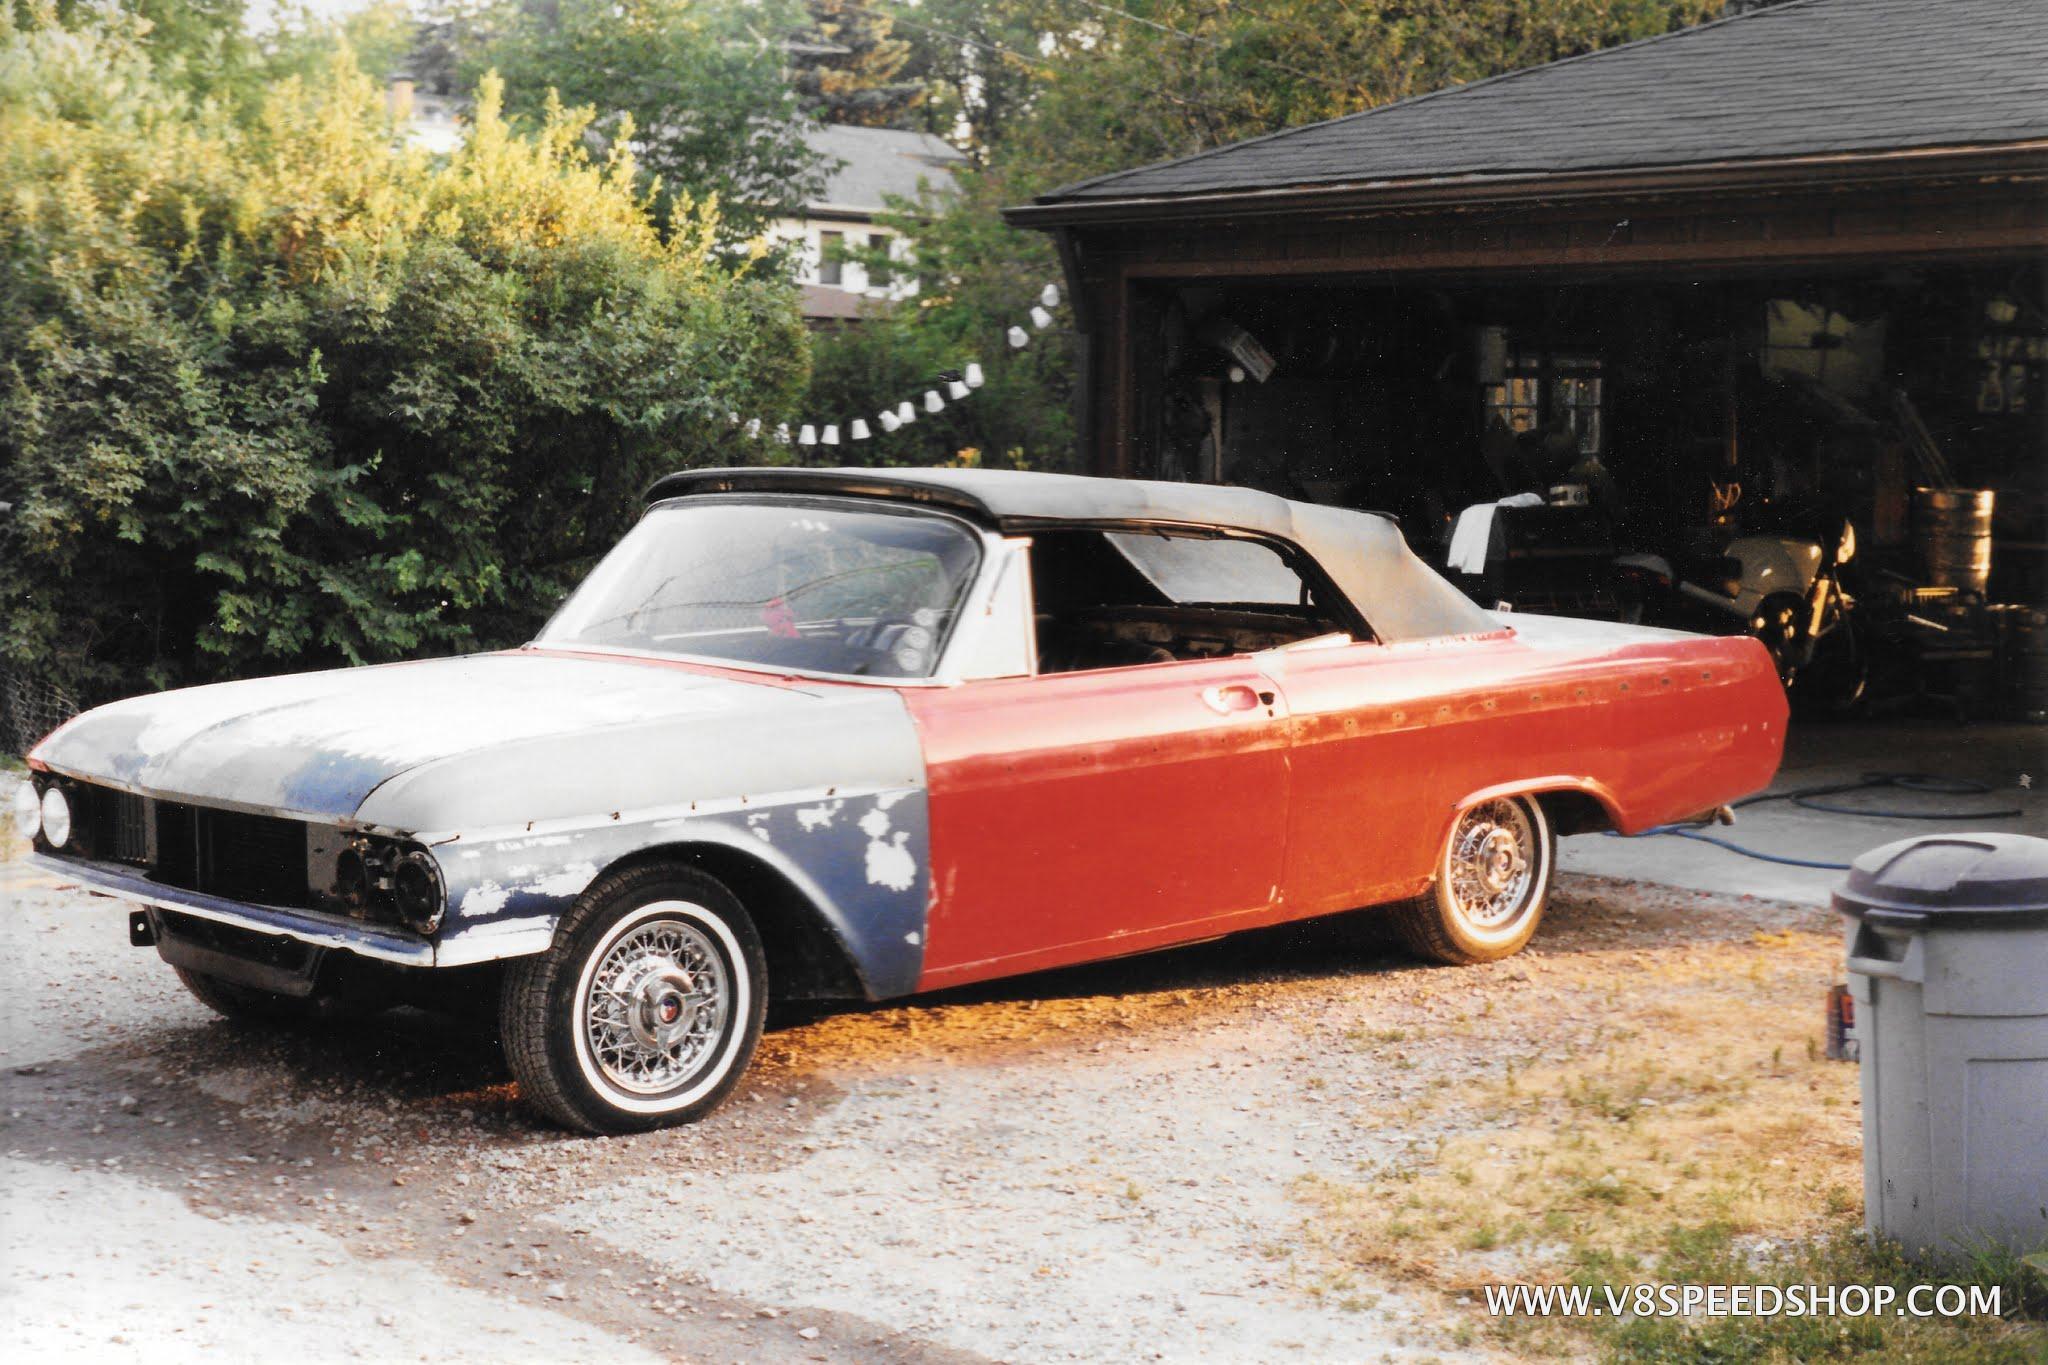 stripping paint from the 1962 Ford Galaxie 500 XL convertible